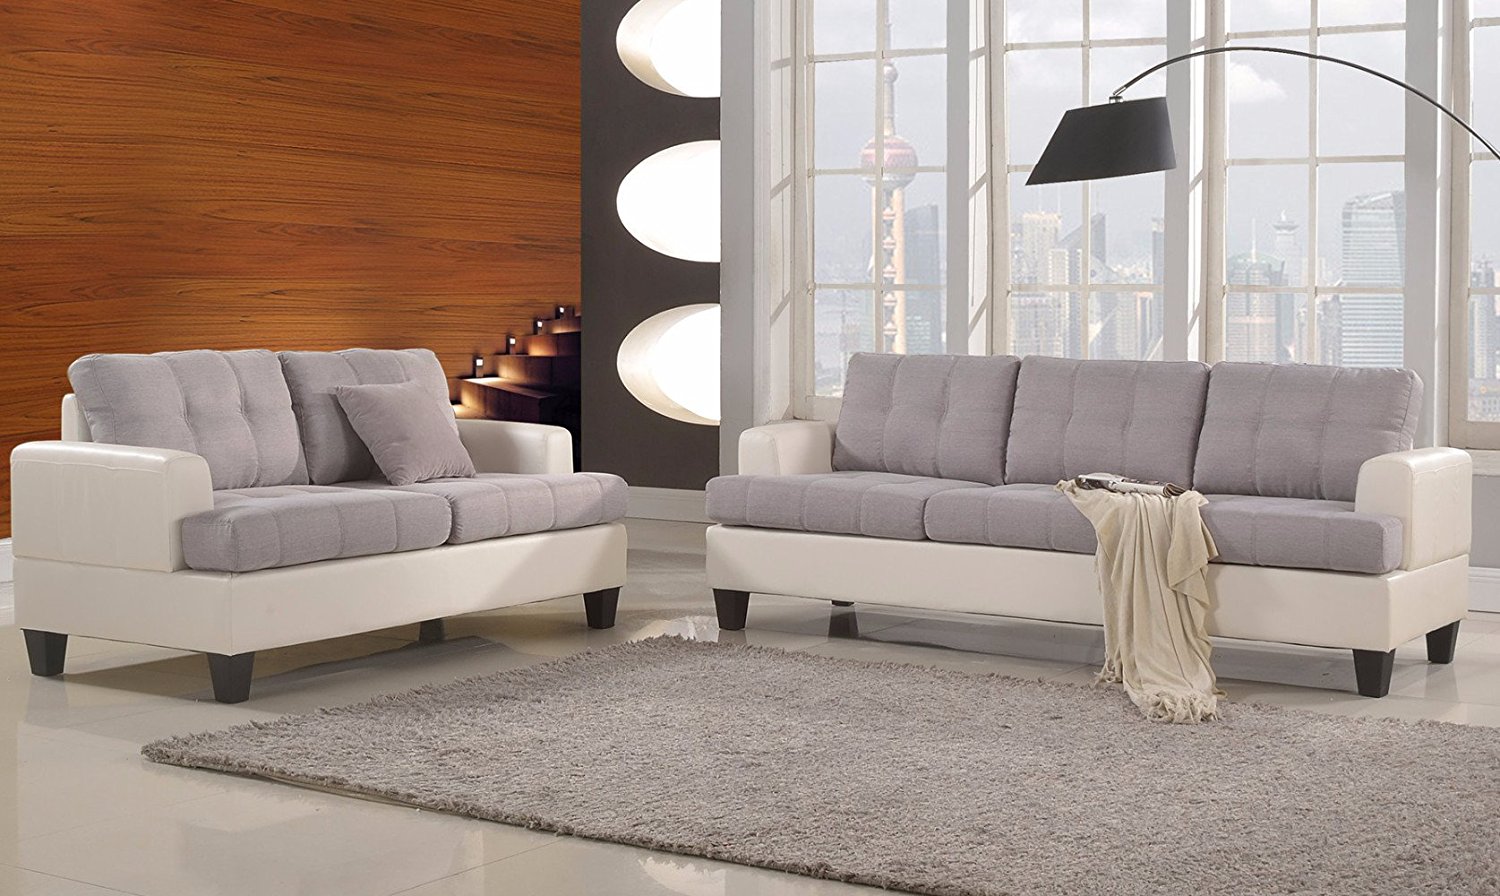 Classic 2 Tone Linen Fabric and Bonded Leather Sofa and Loveseat Living Room Set (White / Grey)